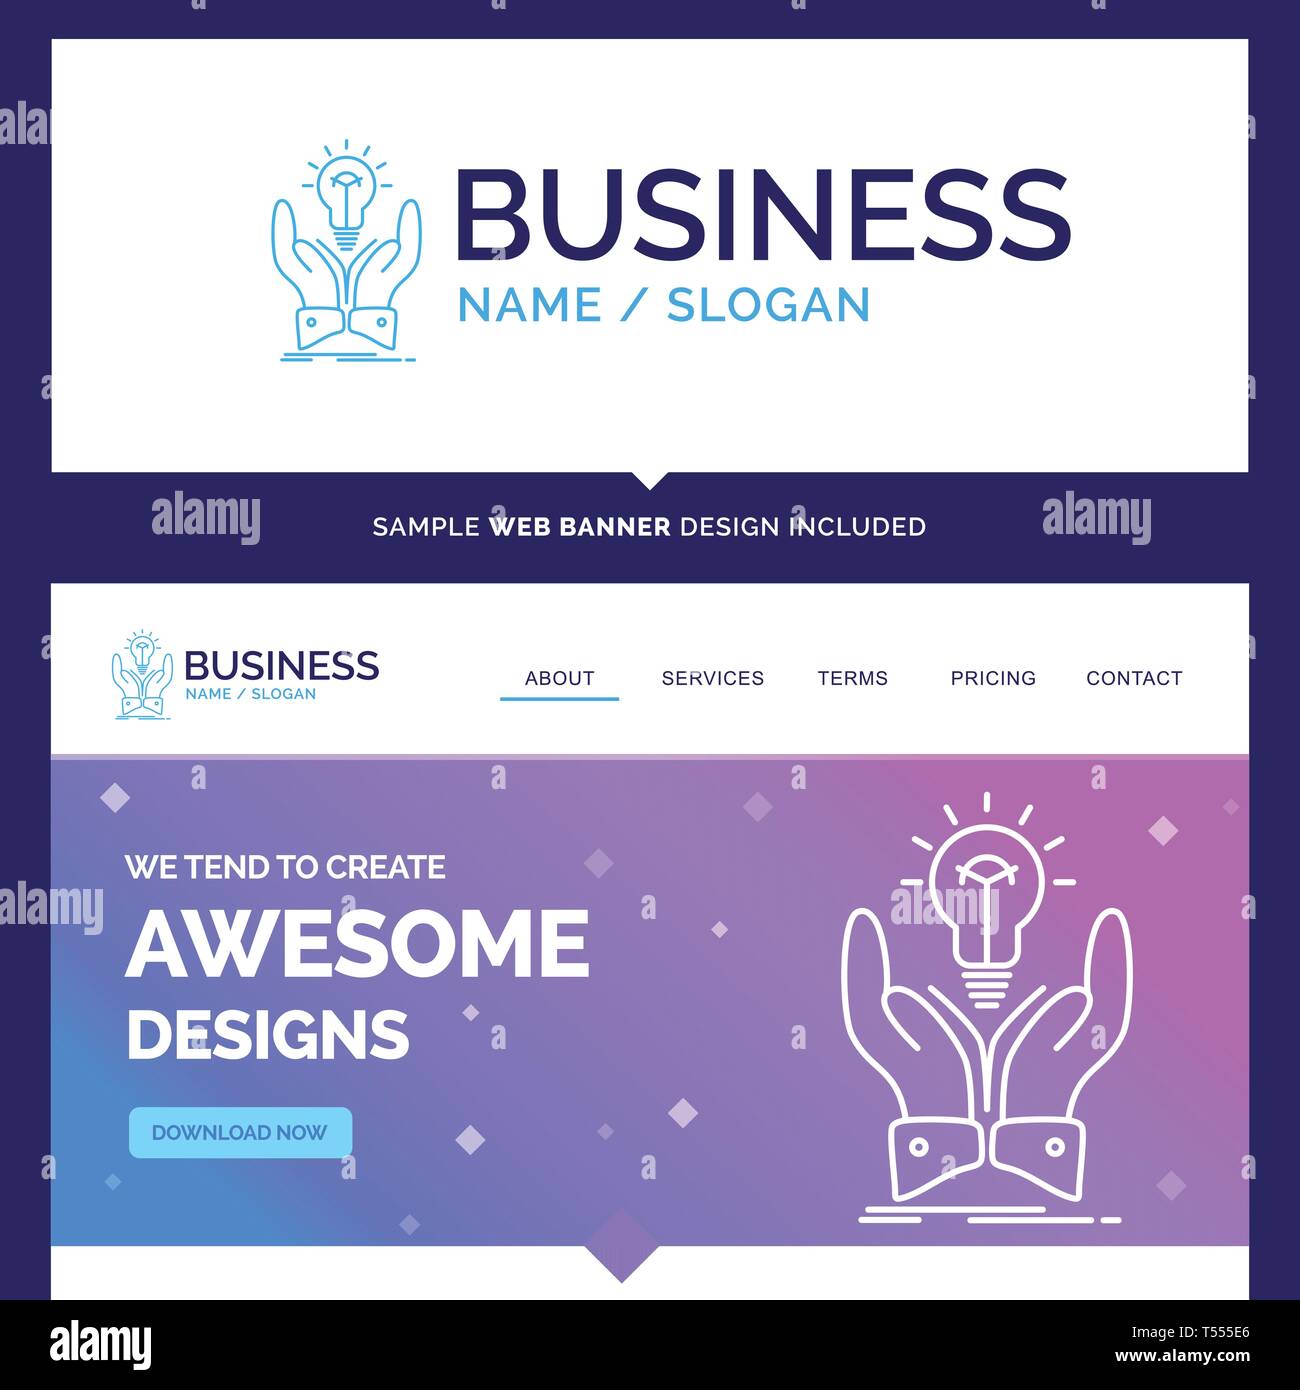 Beautiful Business Concept Brand Name Idea Ideas Creative Share Hands Logo Design And Pink And Blue Background Website Header Design Template Pla Stock Vector Image Art Alamy